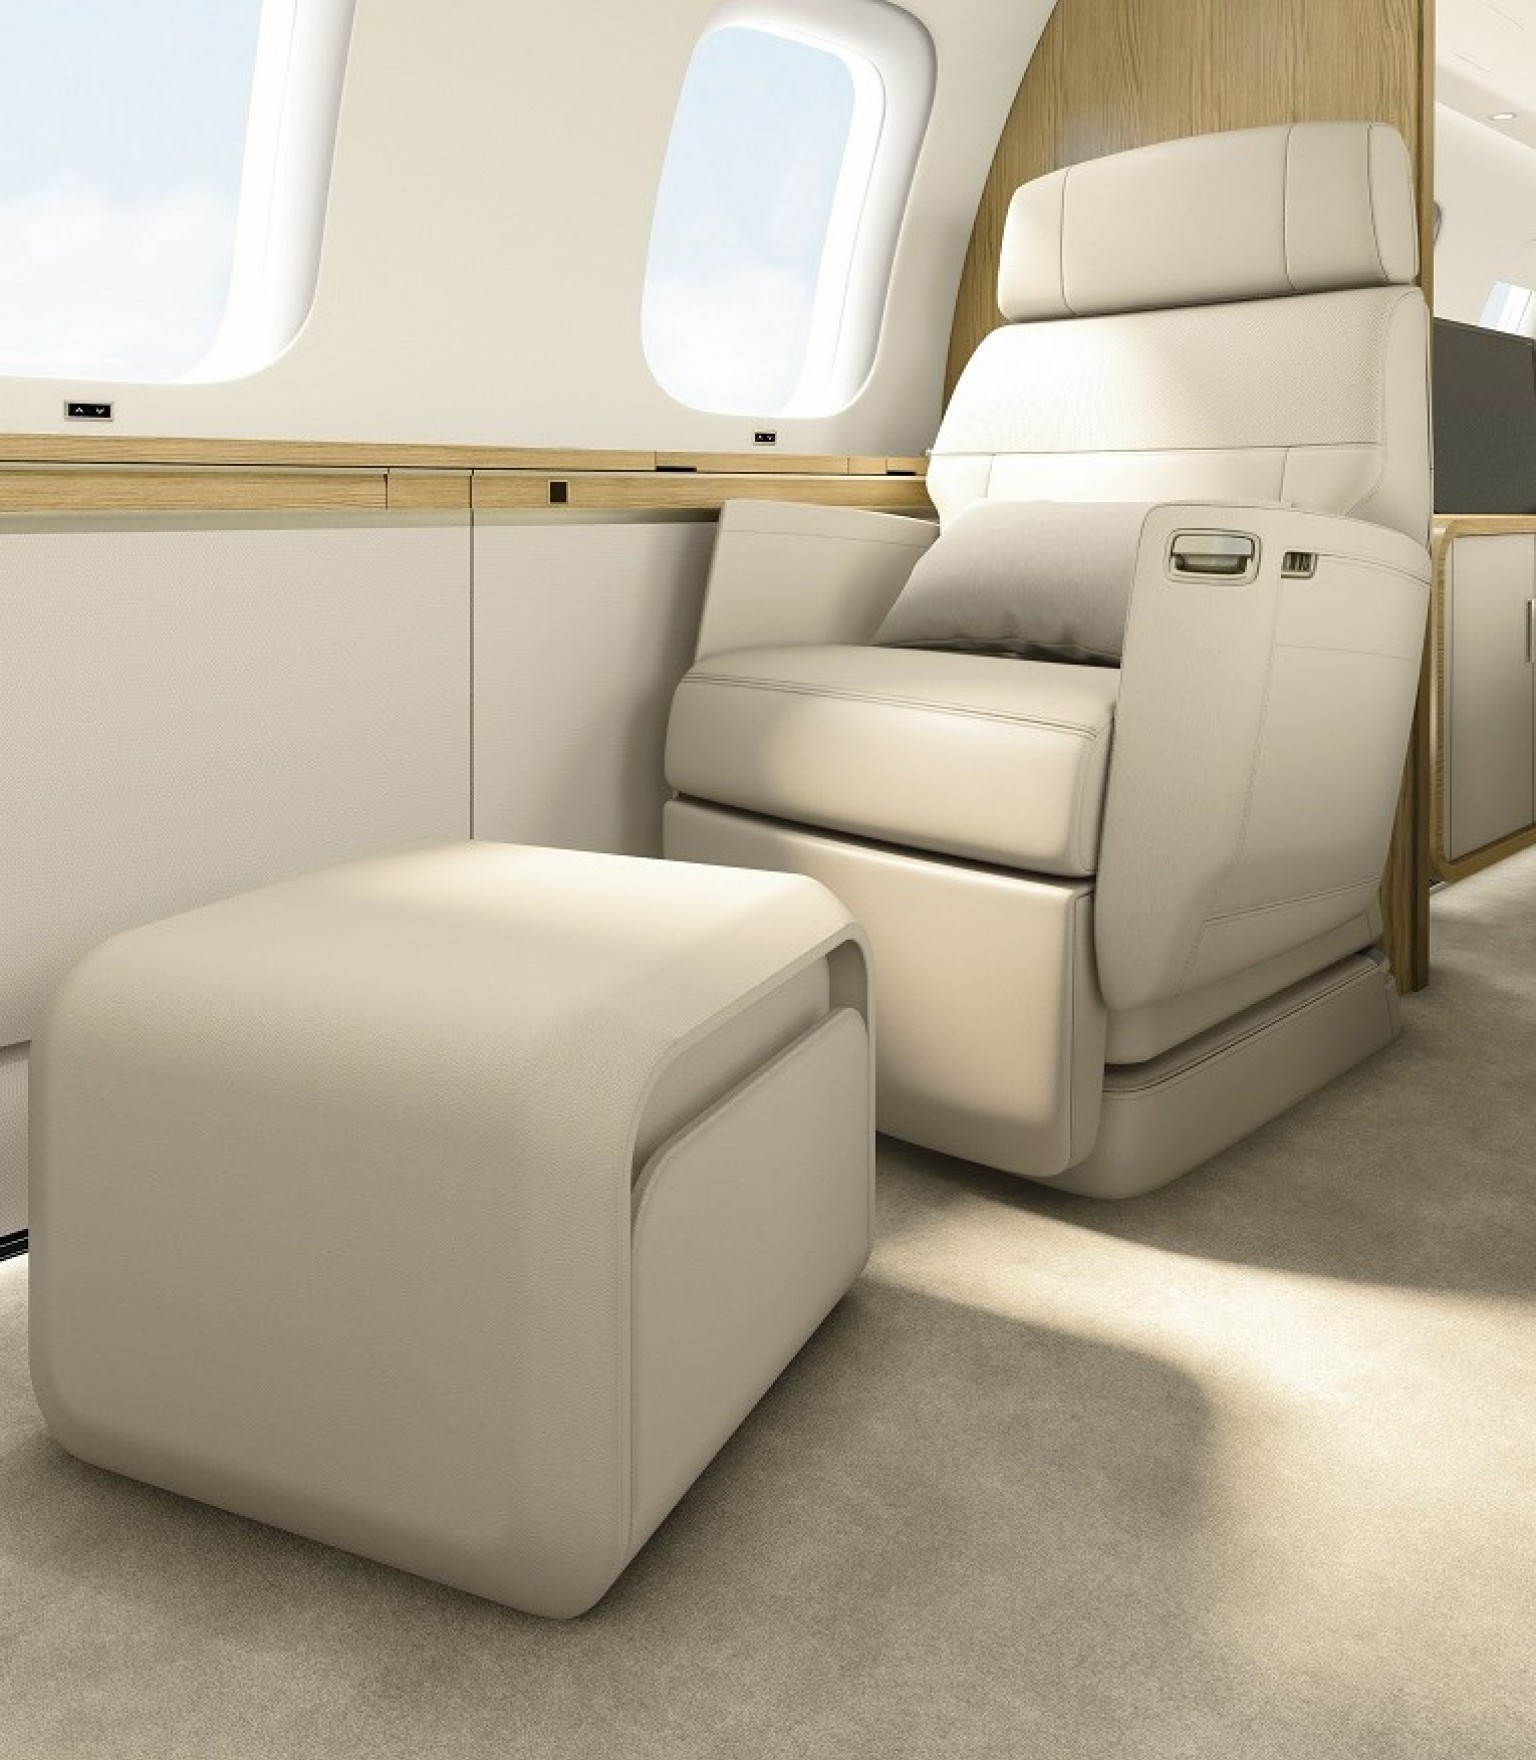 The Nuage chaise in a Global 6500 cabin